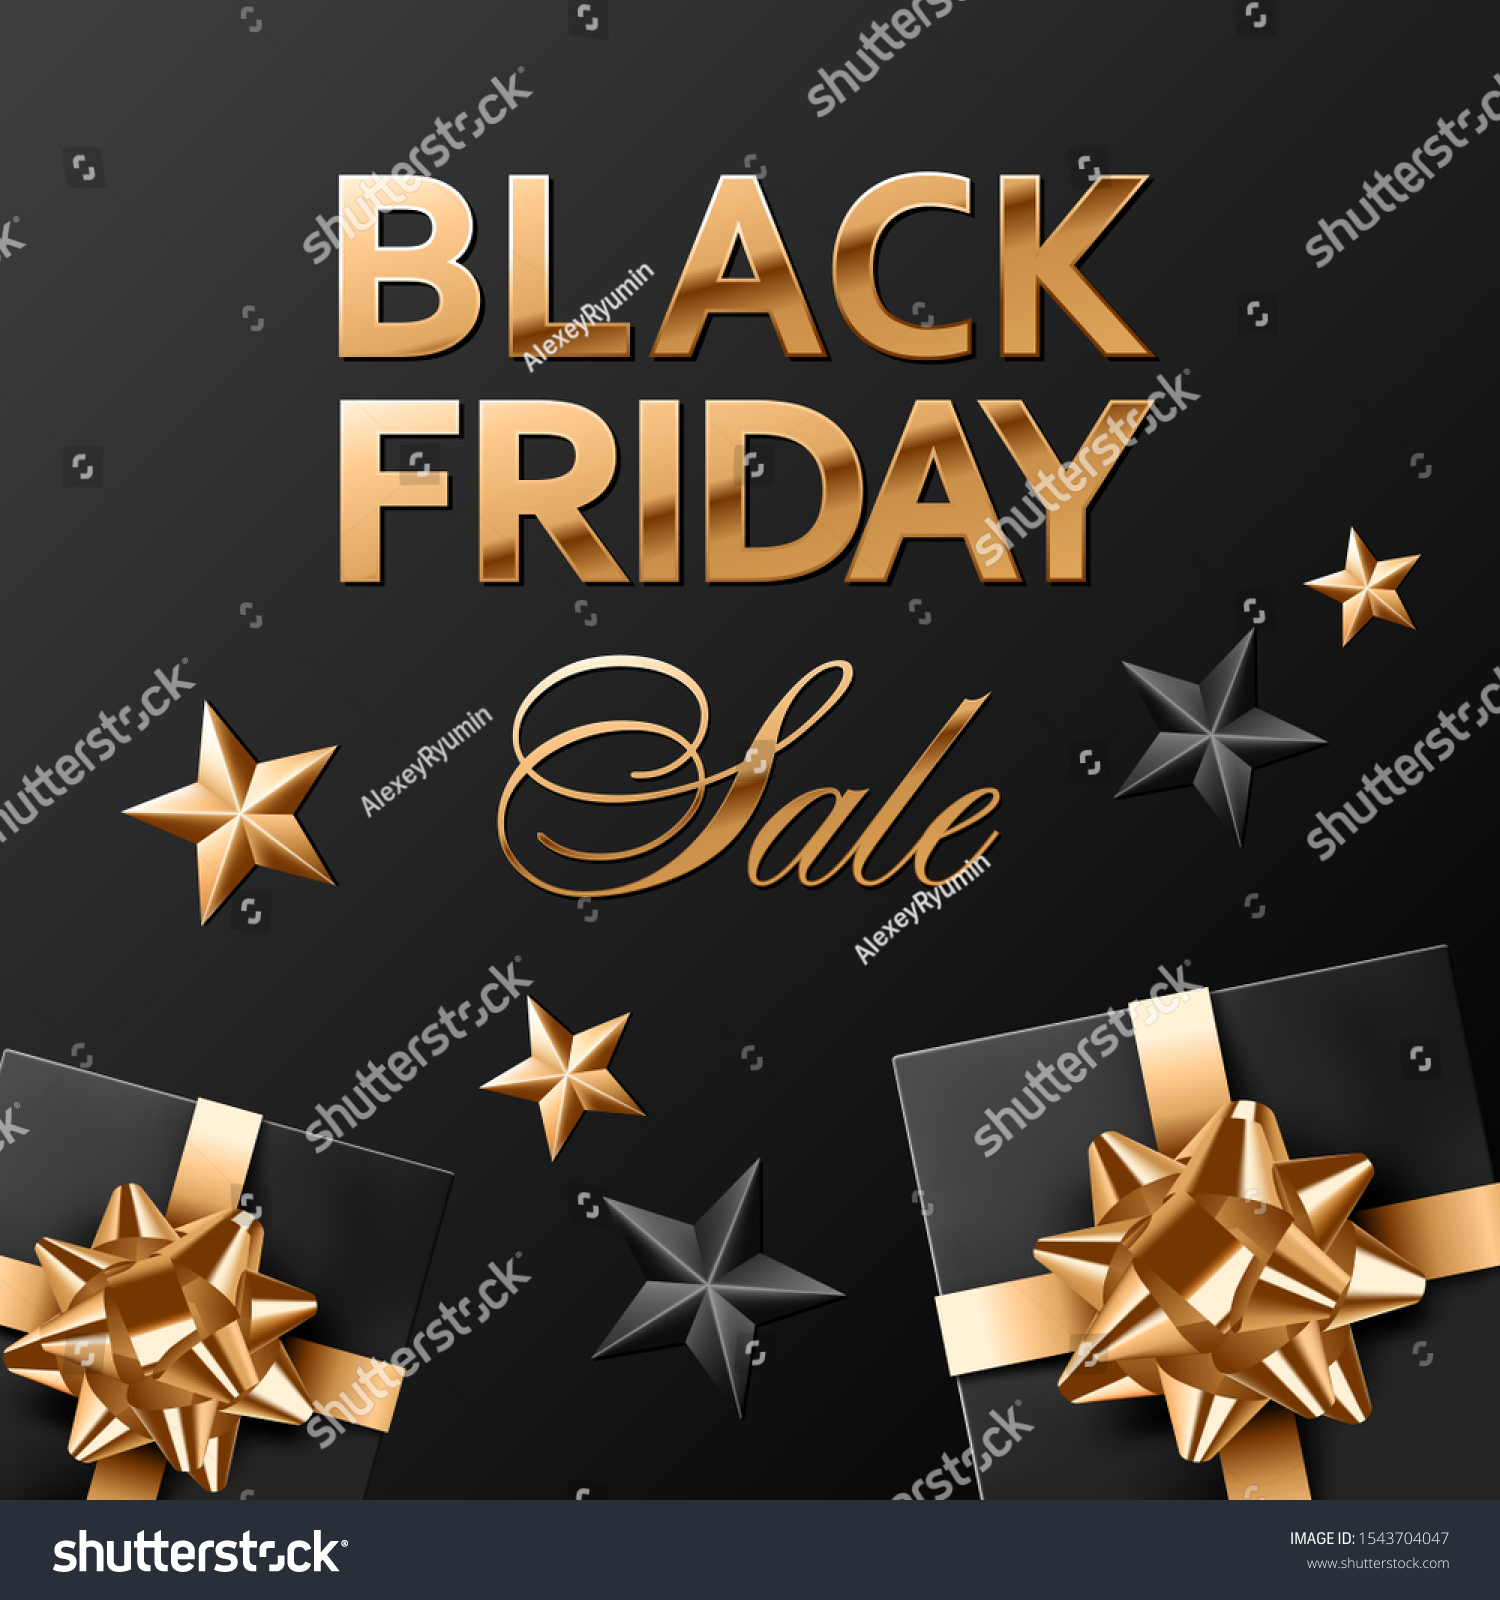 Square social media post or banner vector template. Black friday golden lettering on black background with black covered gifts with golden bows and black and gold stars.
